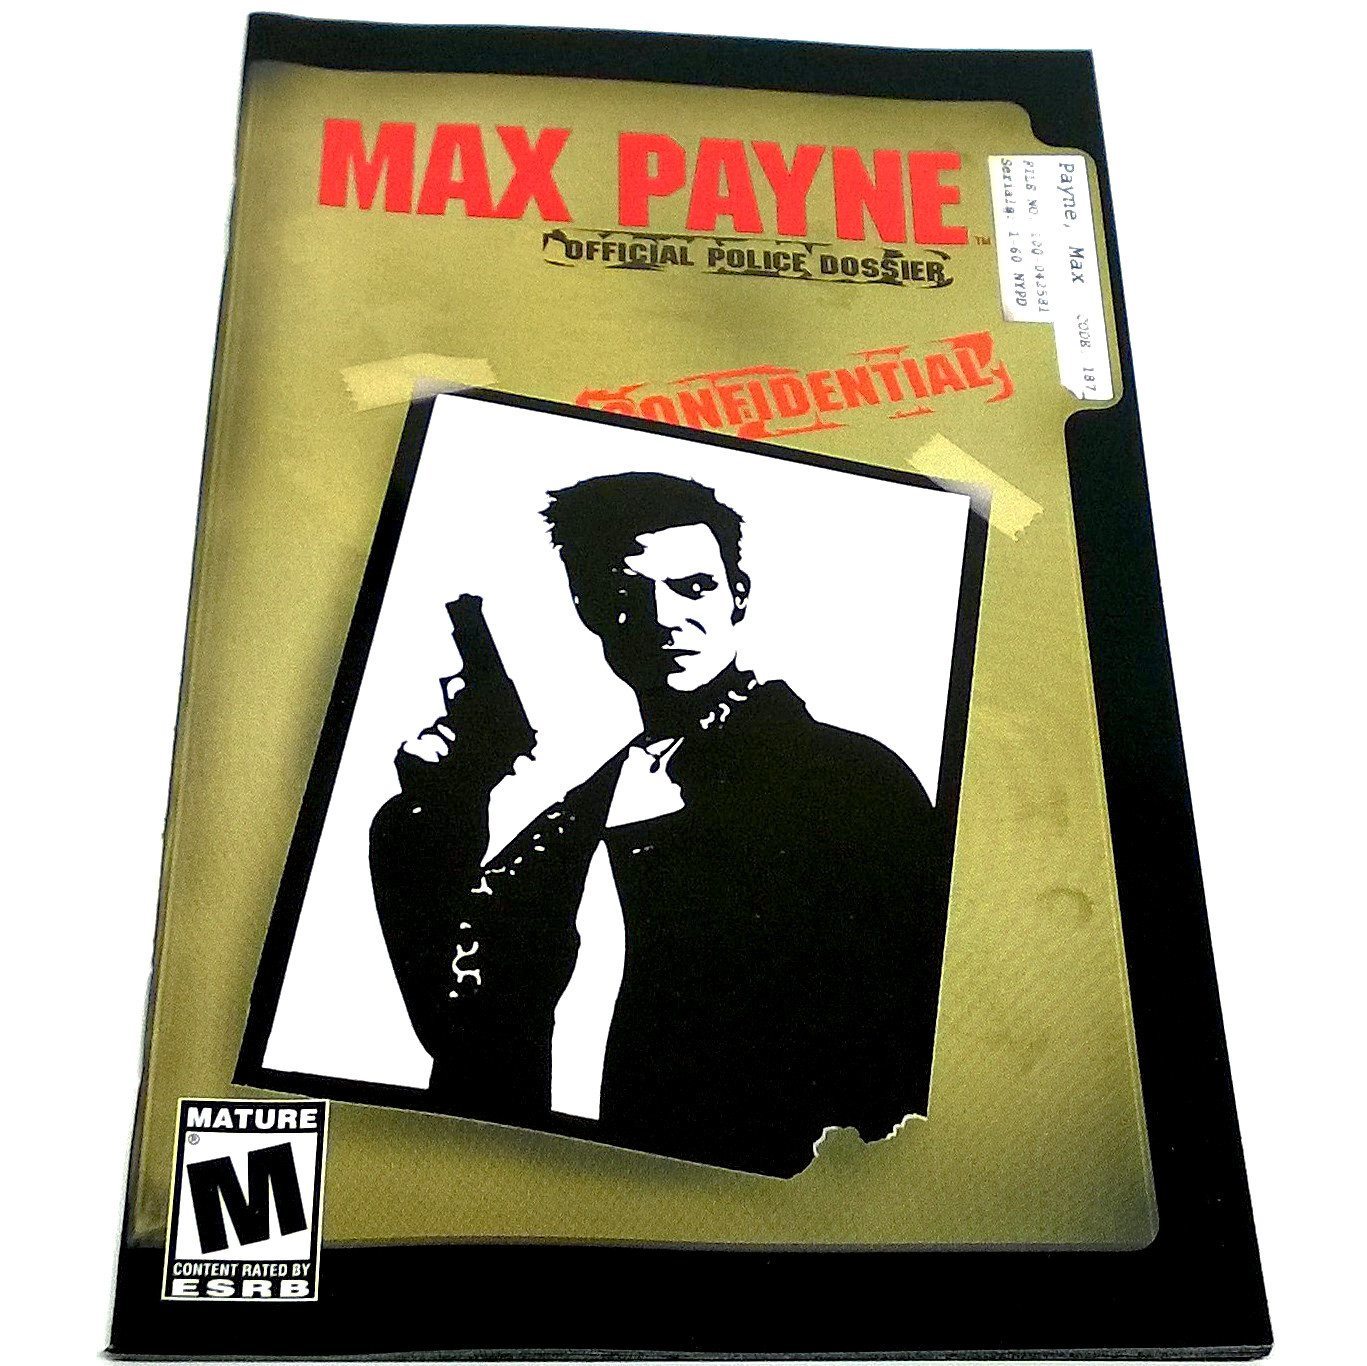 Max Payne for PlayStation 2 - Front of manual